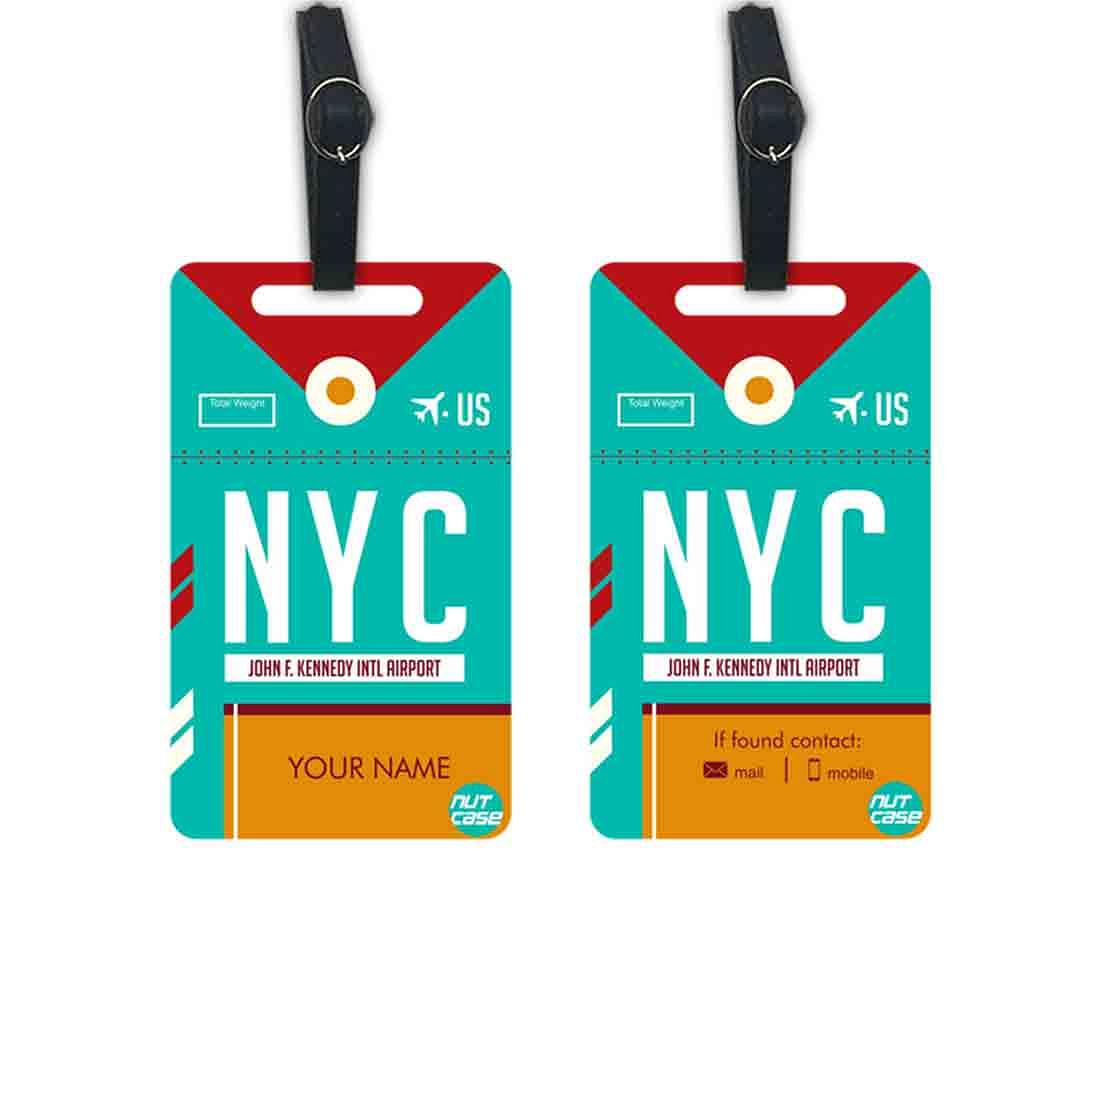 Personalized Travel Luggage Tag for Men - Add your Name - Set of 2 Nutcase